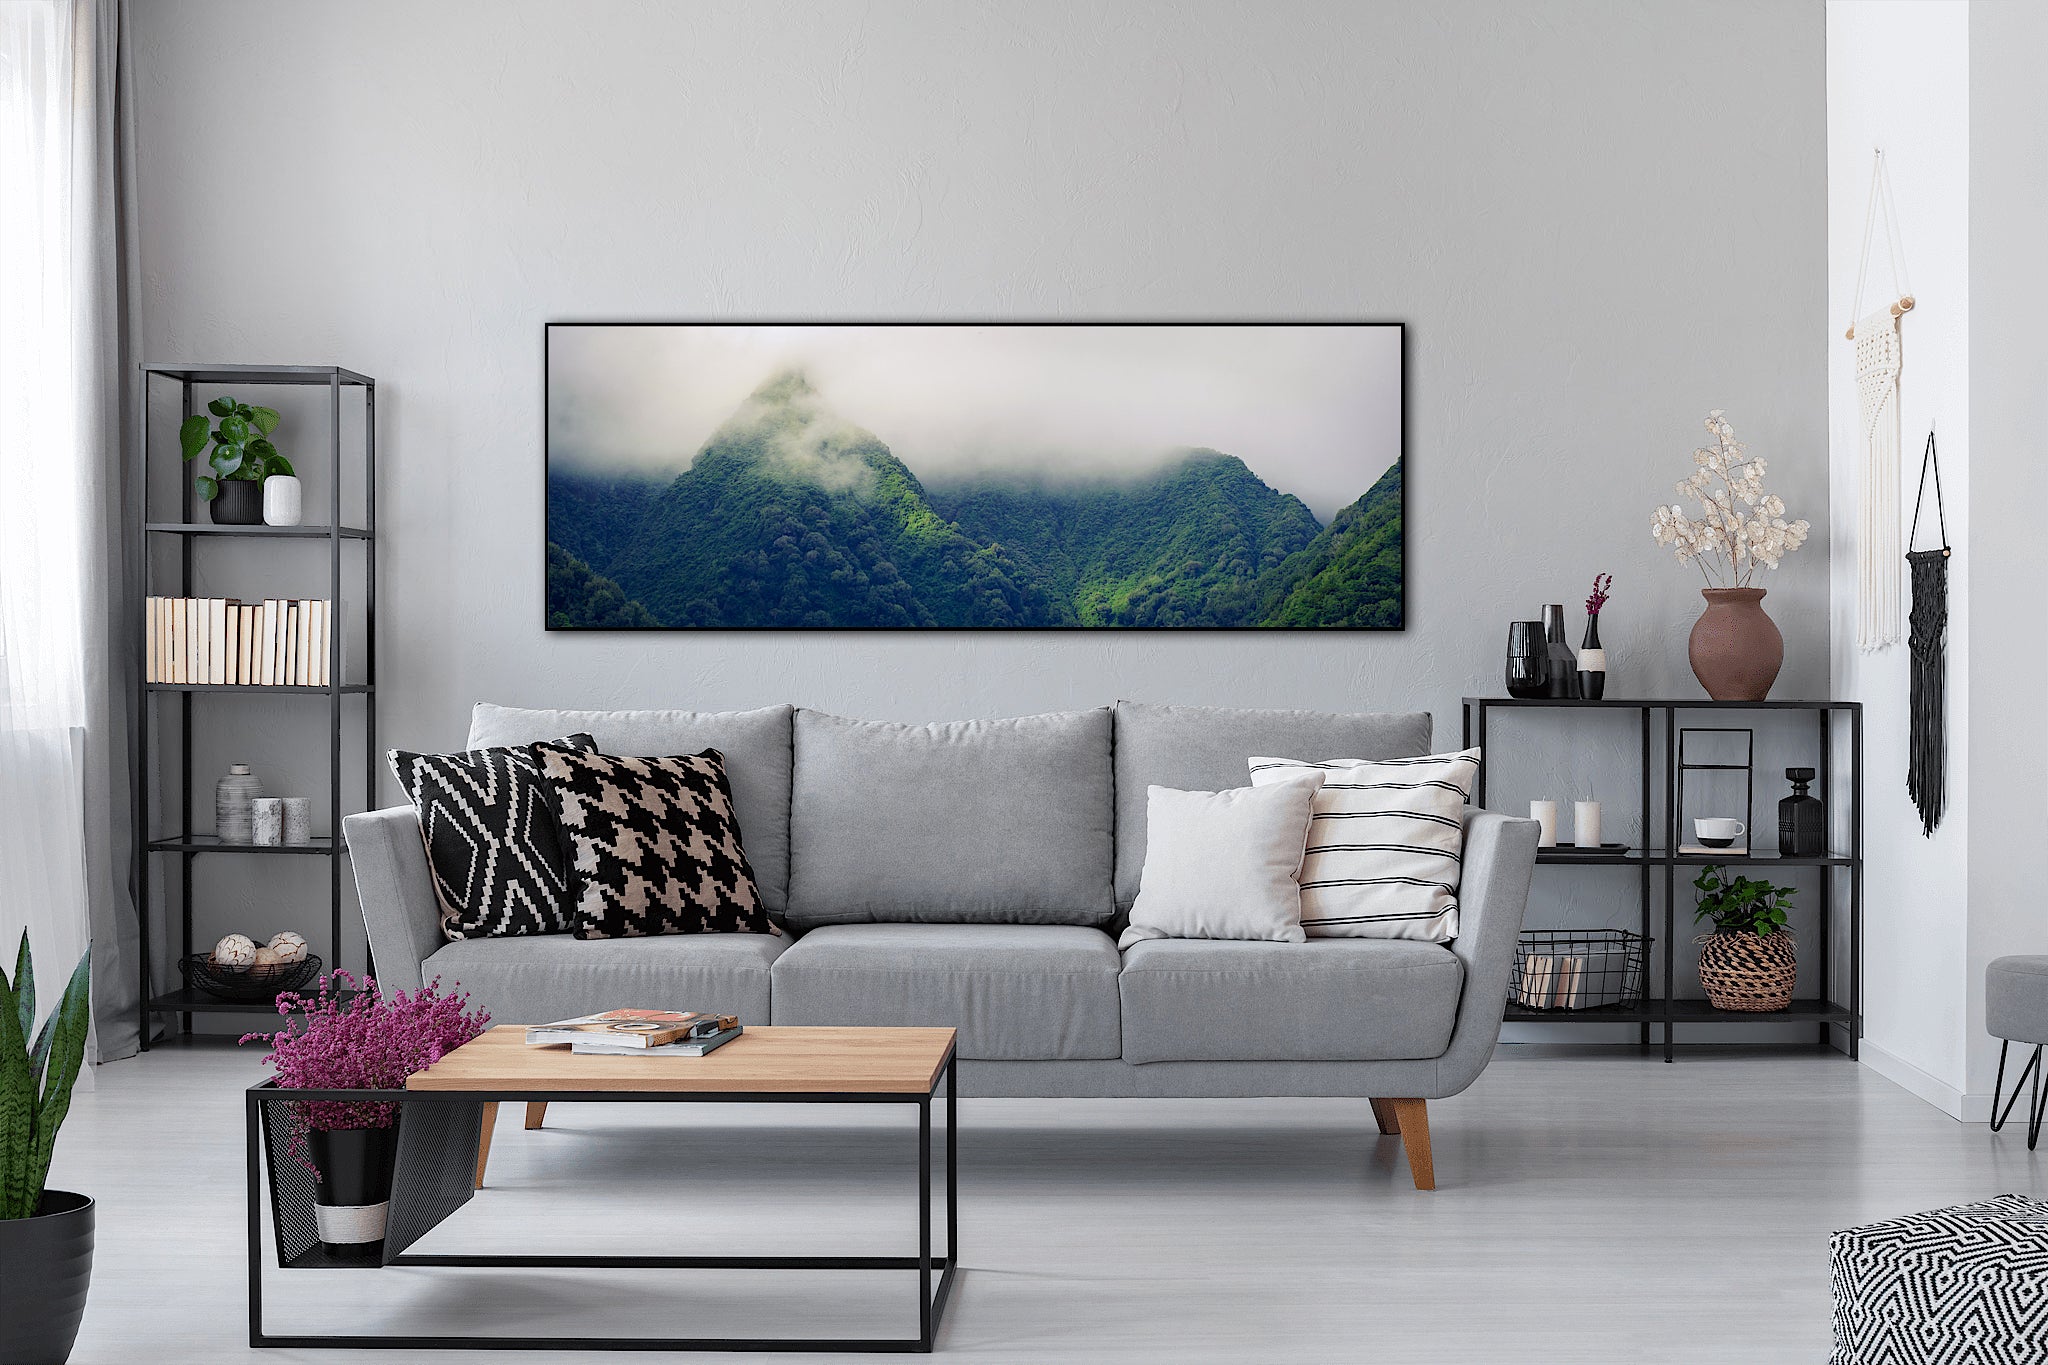 Bringing Nature Home - Discover the Art of Transforming Your Space with New Zealand Landscape Photography by Award Winning Photographer Stephen Milner